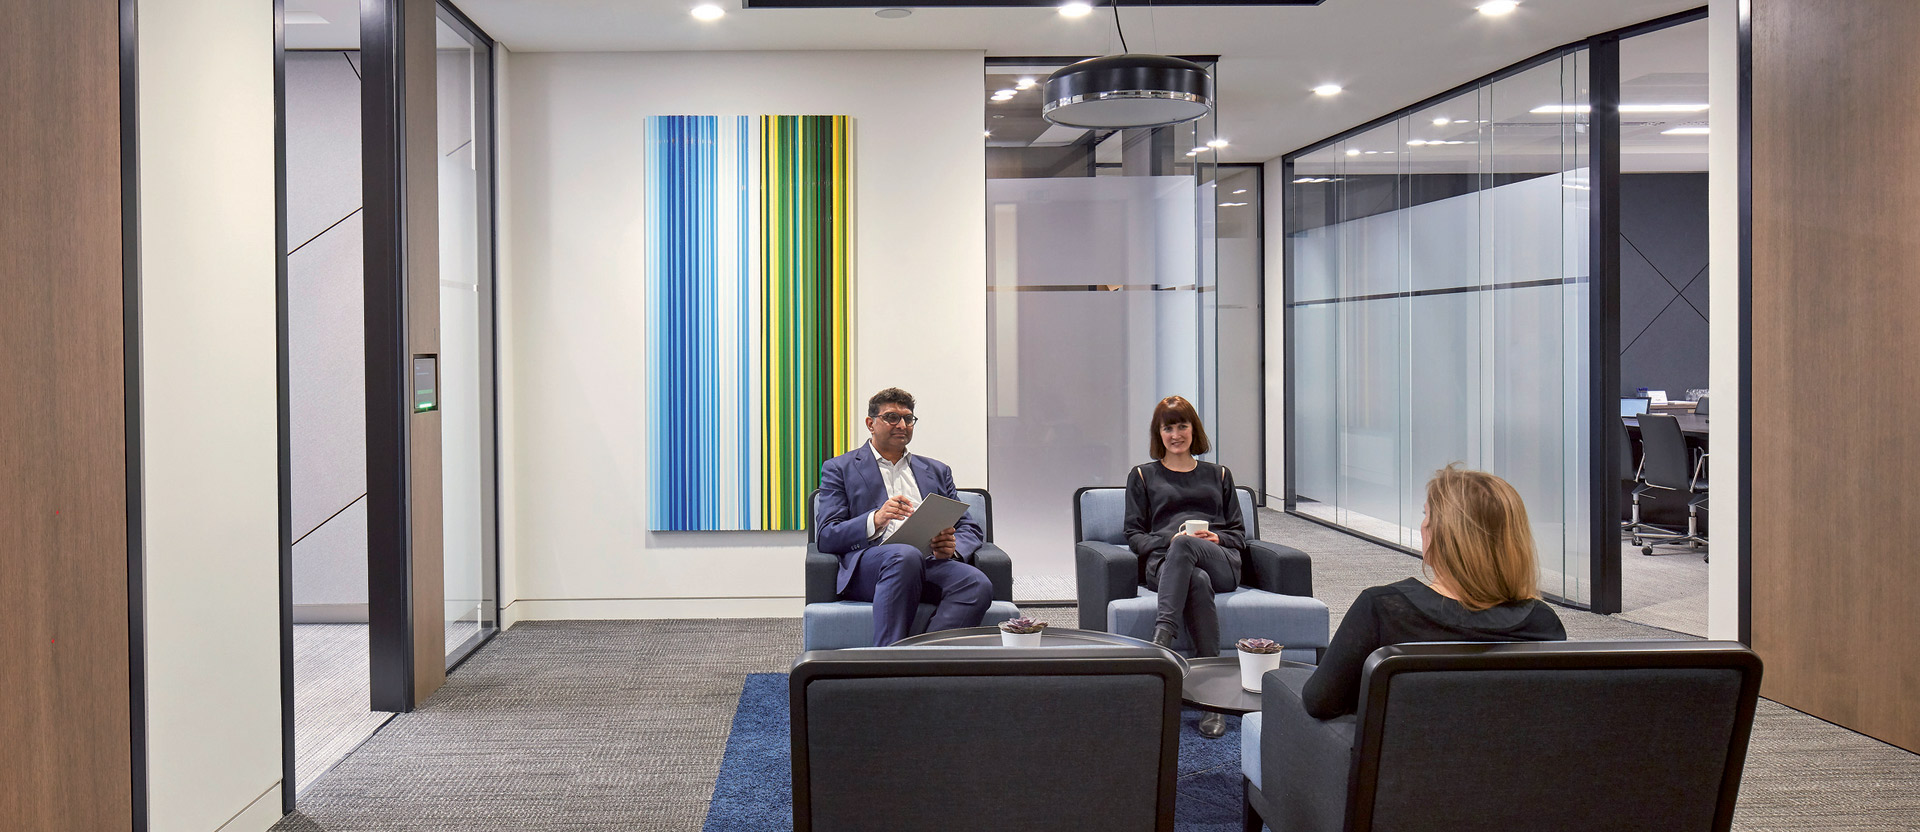 Modern office lounge space with sleek charcoal sofas, positioned around a low-profile coffee table. A vibrant, vertical stripe painting adds a pop of color against the neutral walls. Overhead, a circular pendant light fixture anchors the seating area, while floor-to-ceiling glass partitions provide transparency to adjoining workspaces.